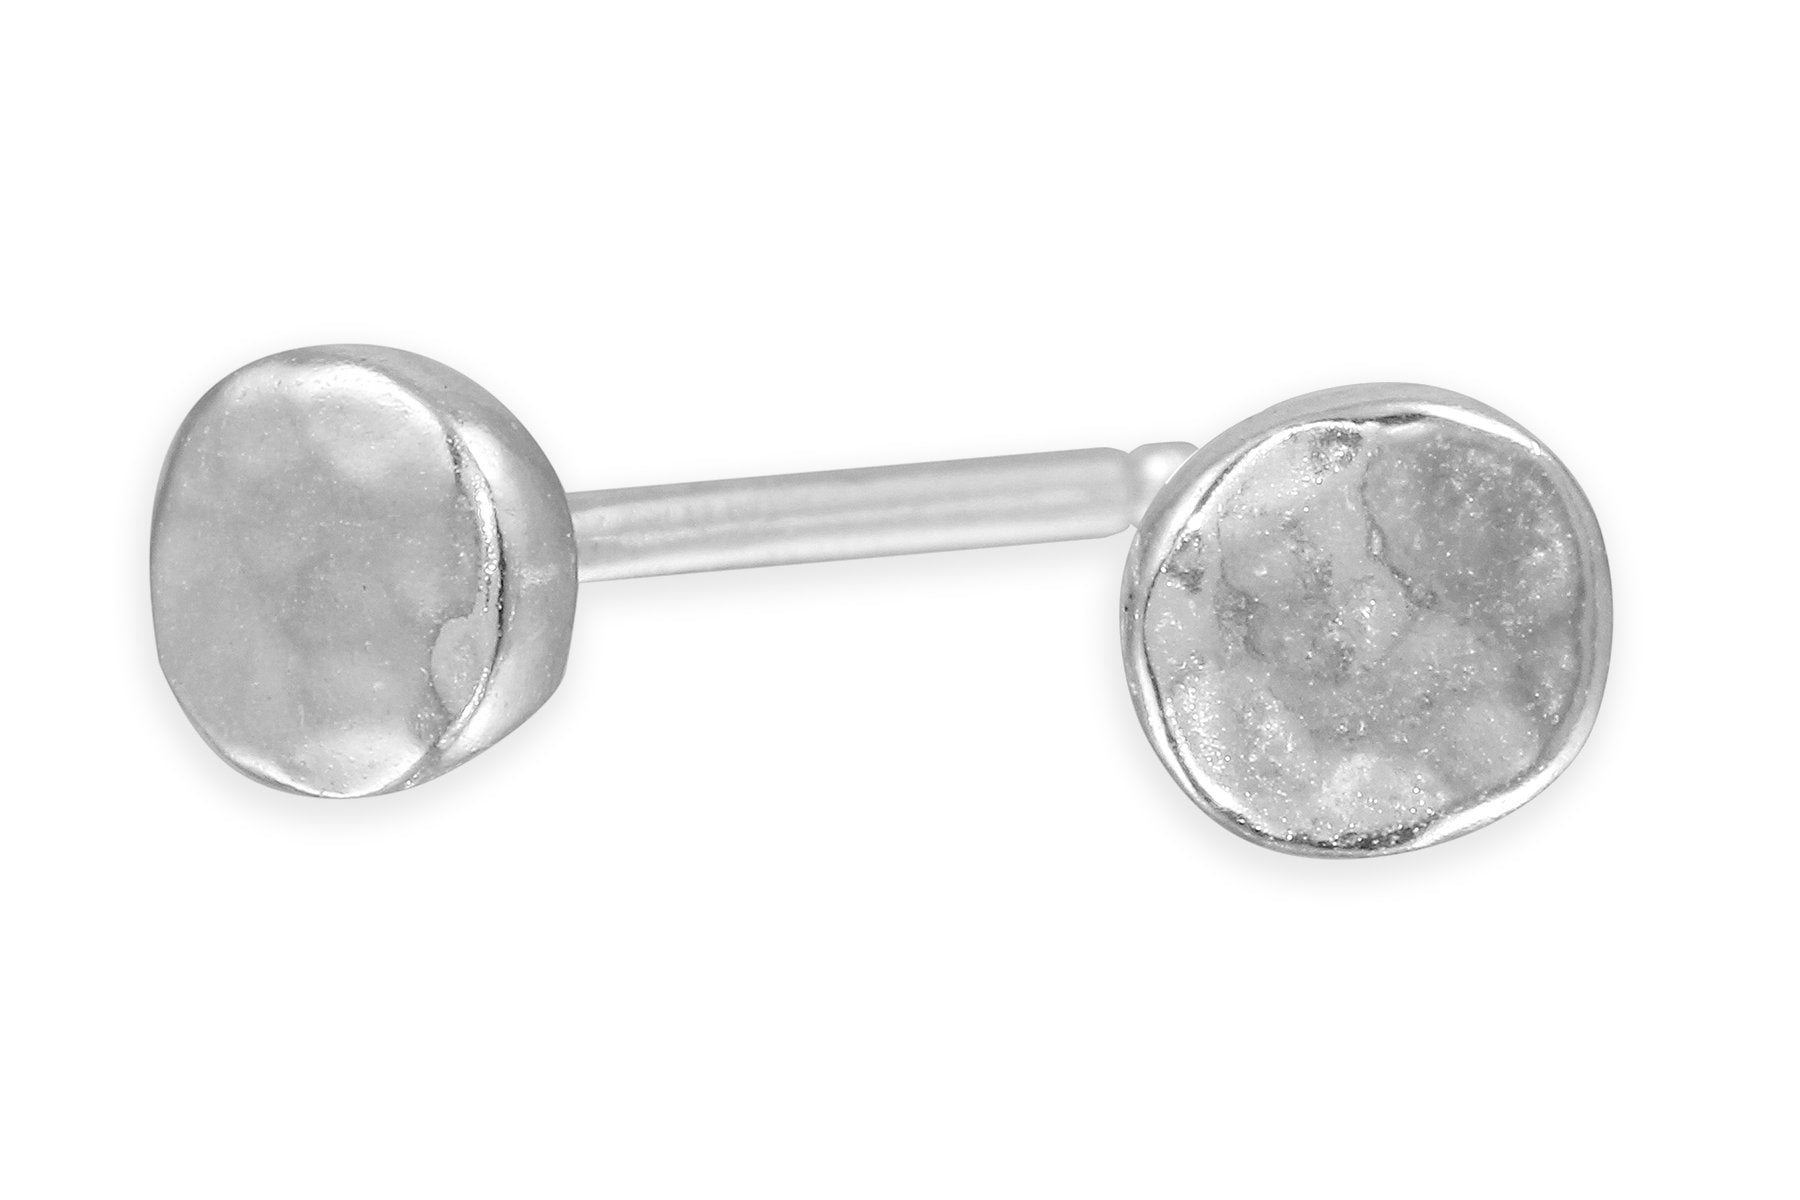 Teeny tiny pebble studs - choose from gold or silver earrings Amanda K Lockrow Sterling silver 